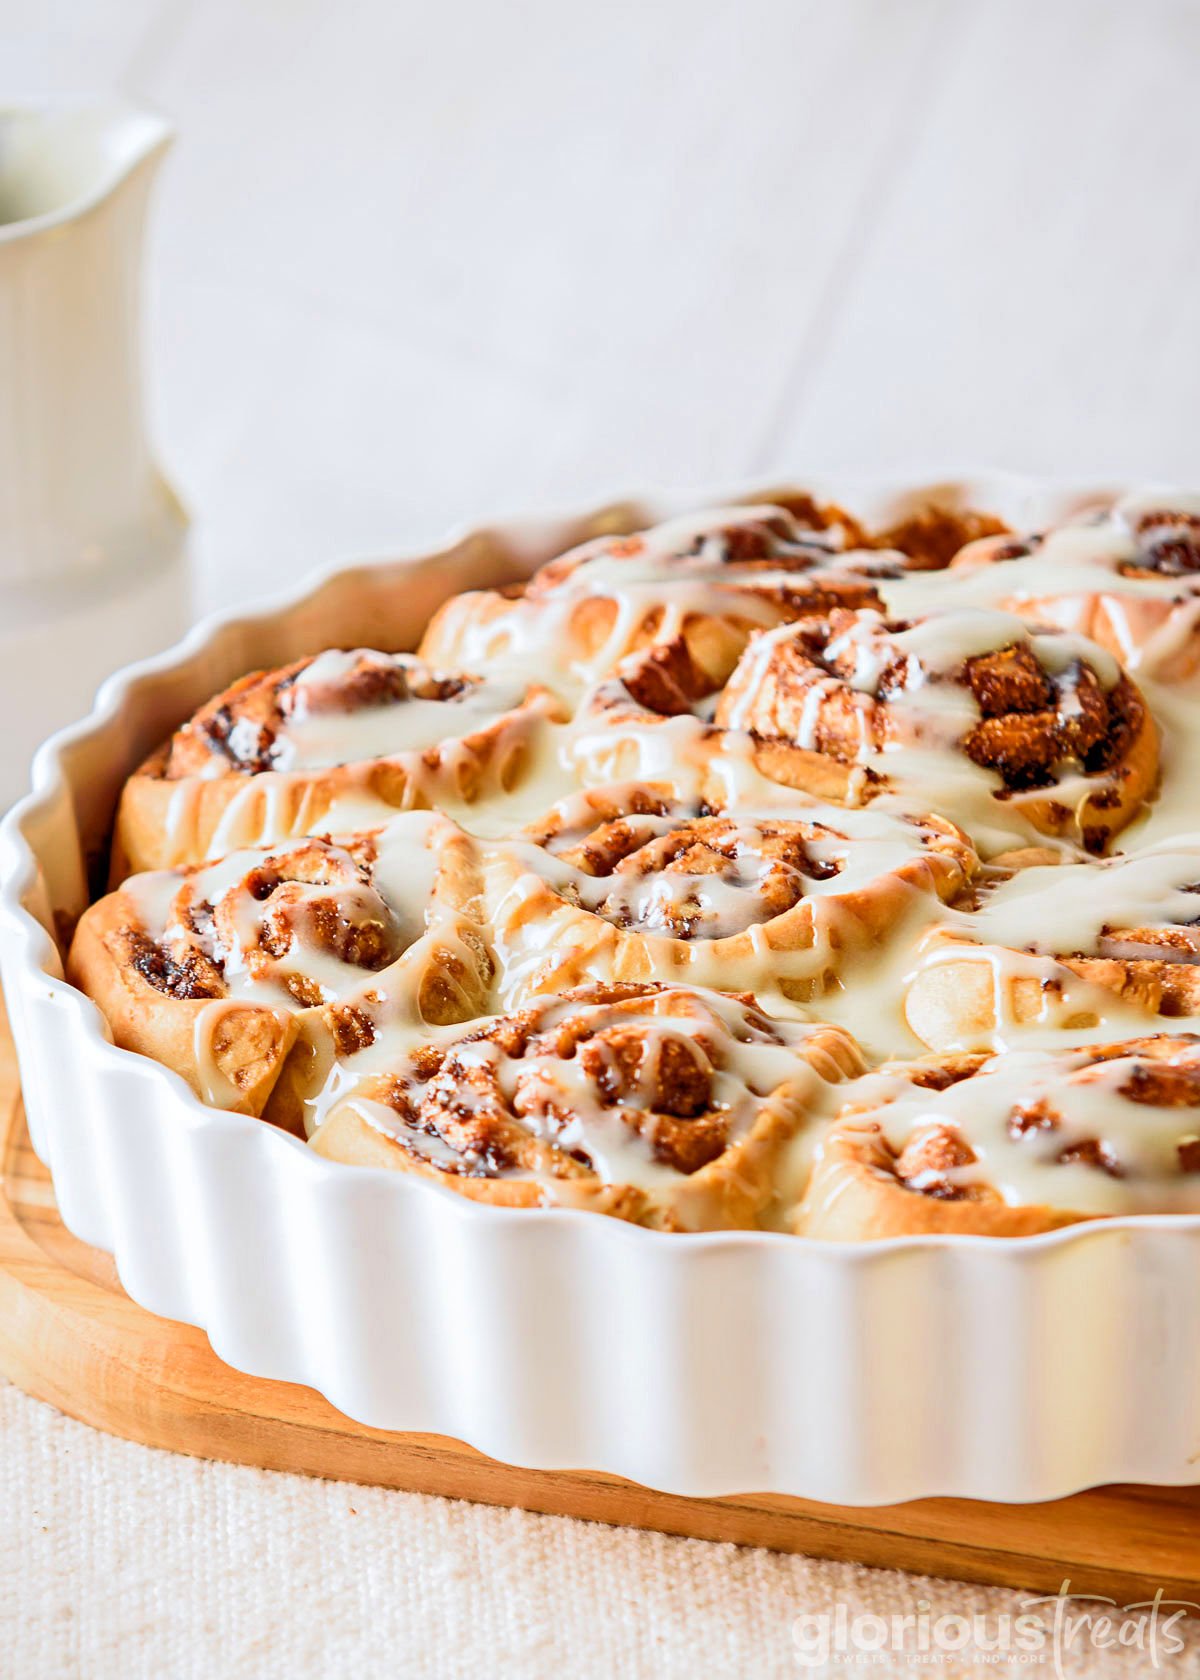 cinnamon rolls recipe topped with cream cheese cinnamon roll icing in a white round baking dish. baking dish is sitting on wood board.